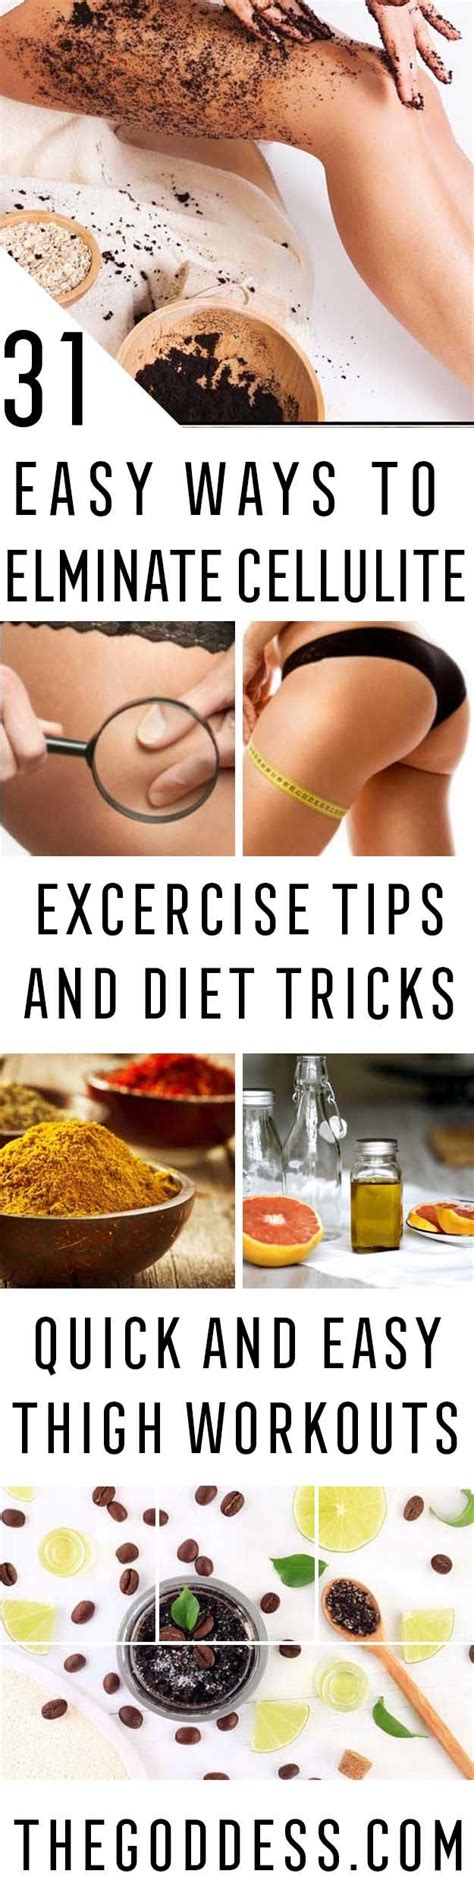 Easy Ways To Eliminate Cellulite Fast How Tos Exercise Tips And Diet